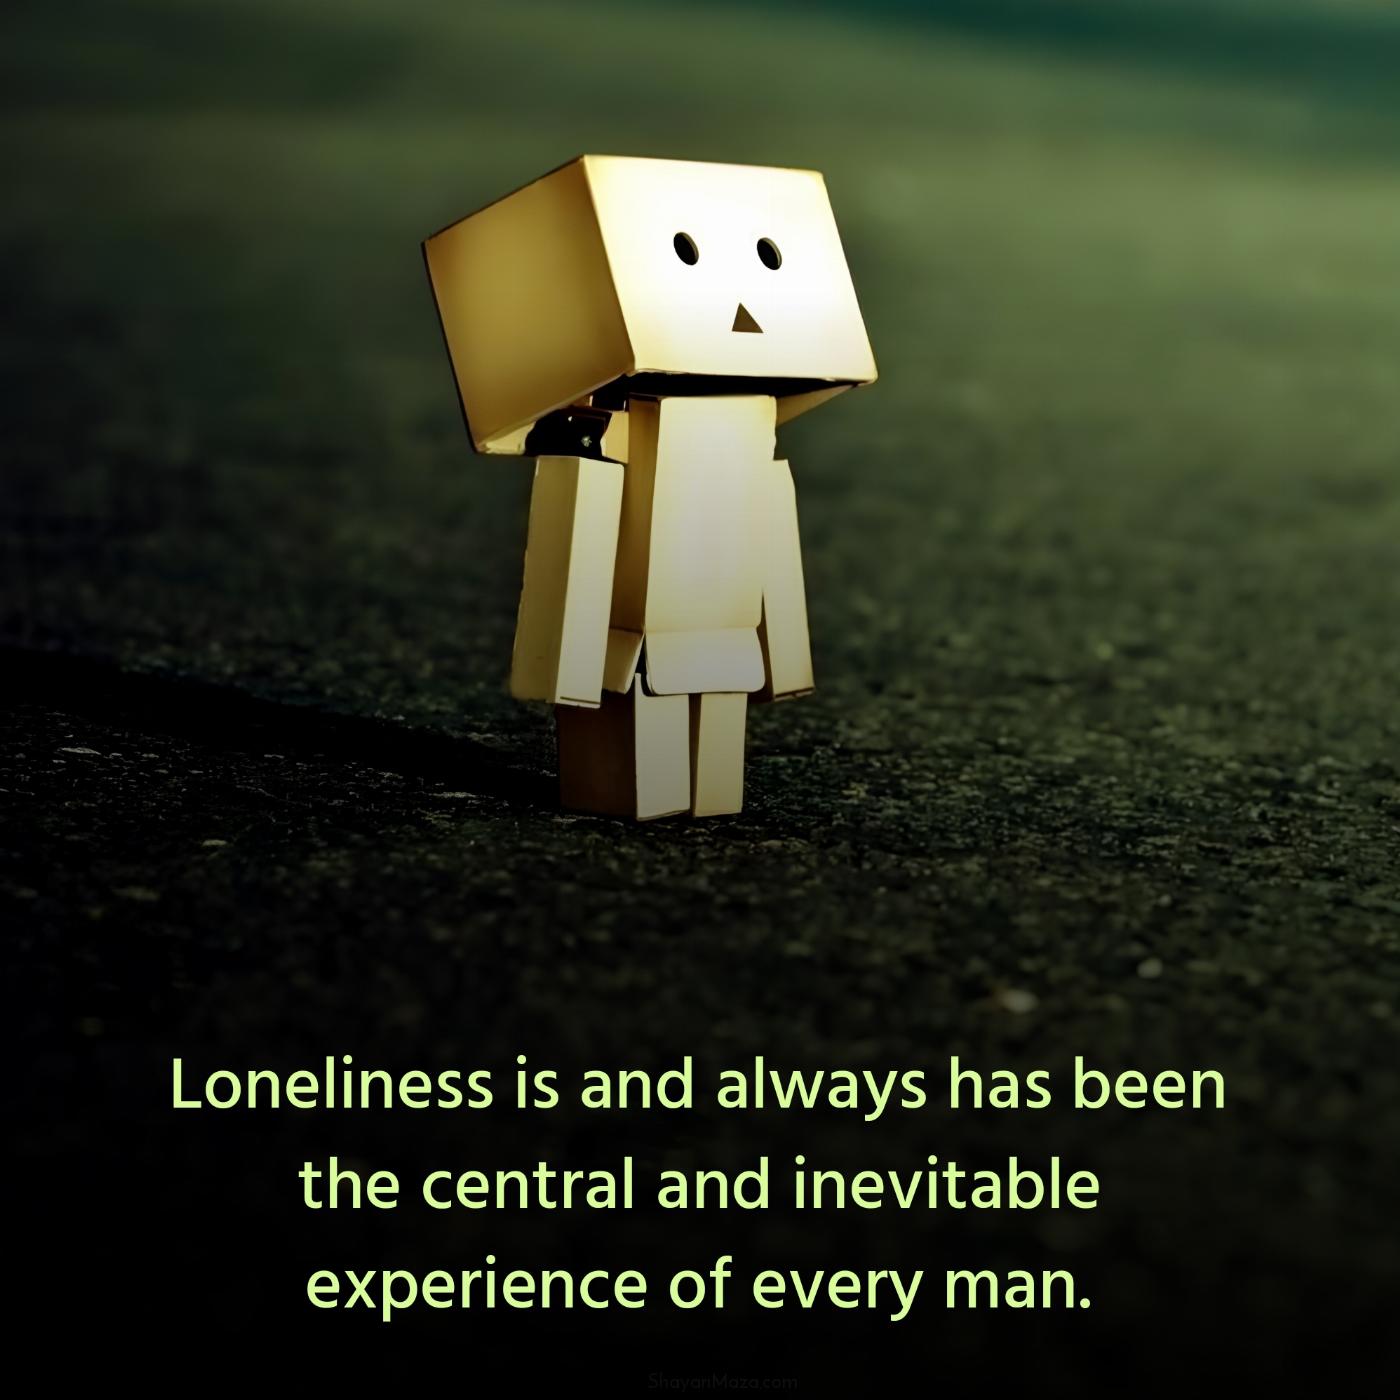 Loneliness is and always has been the central and inevitable